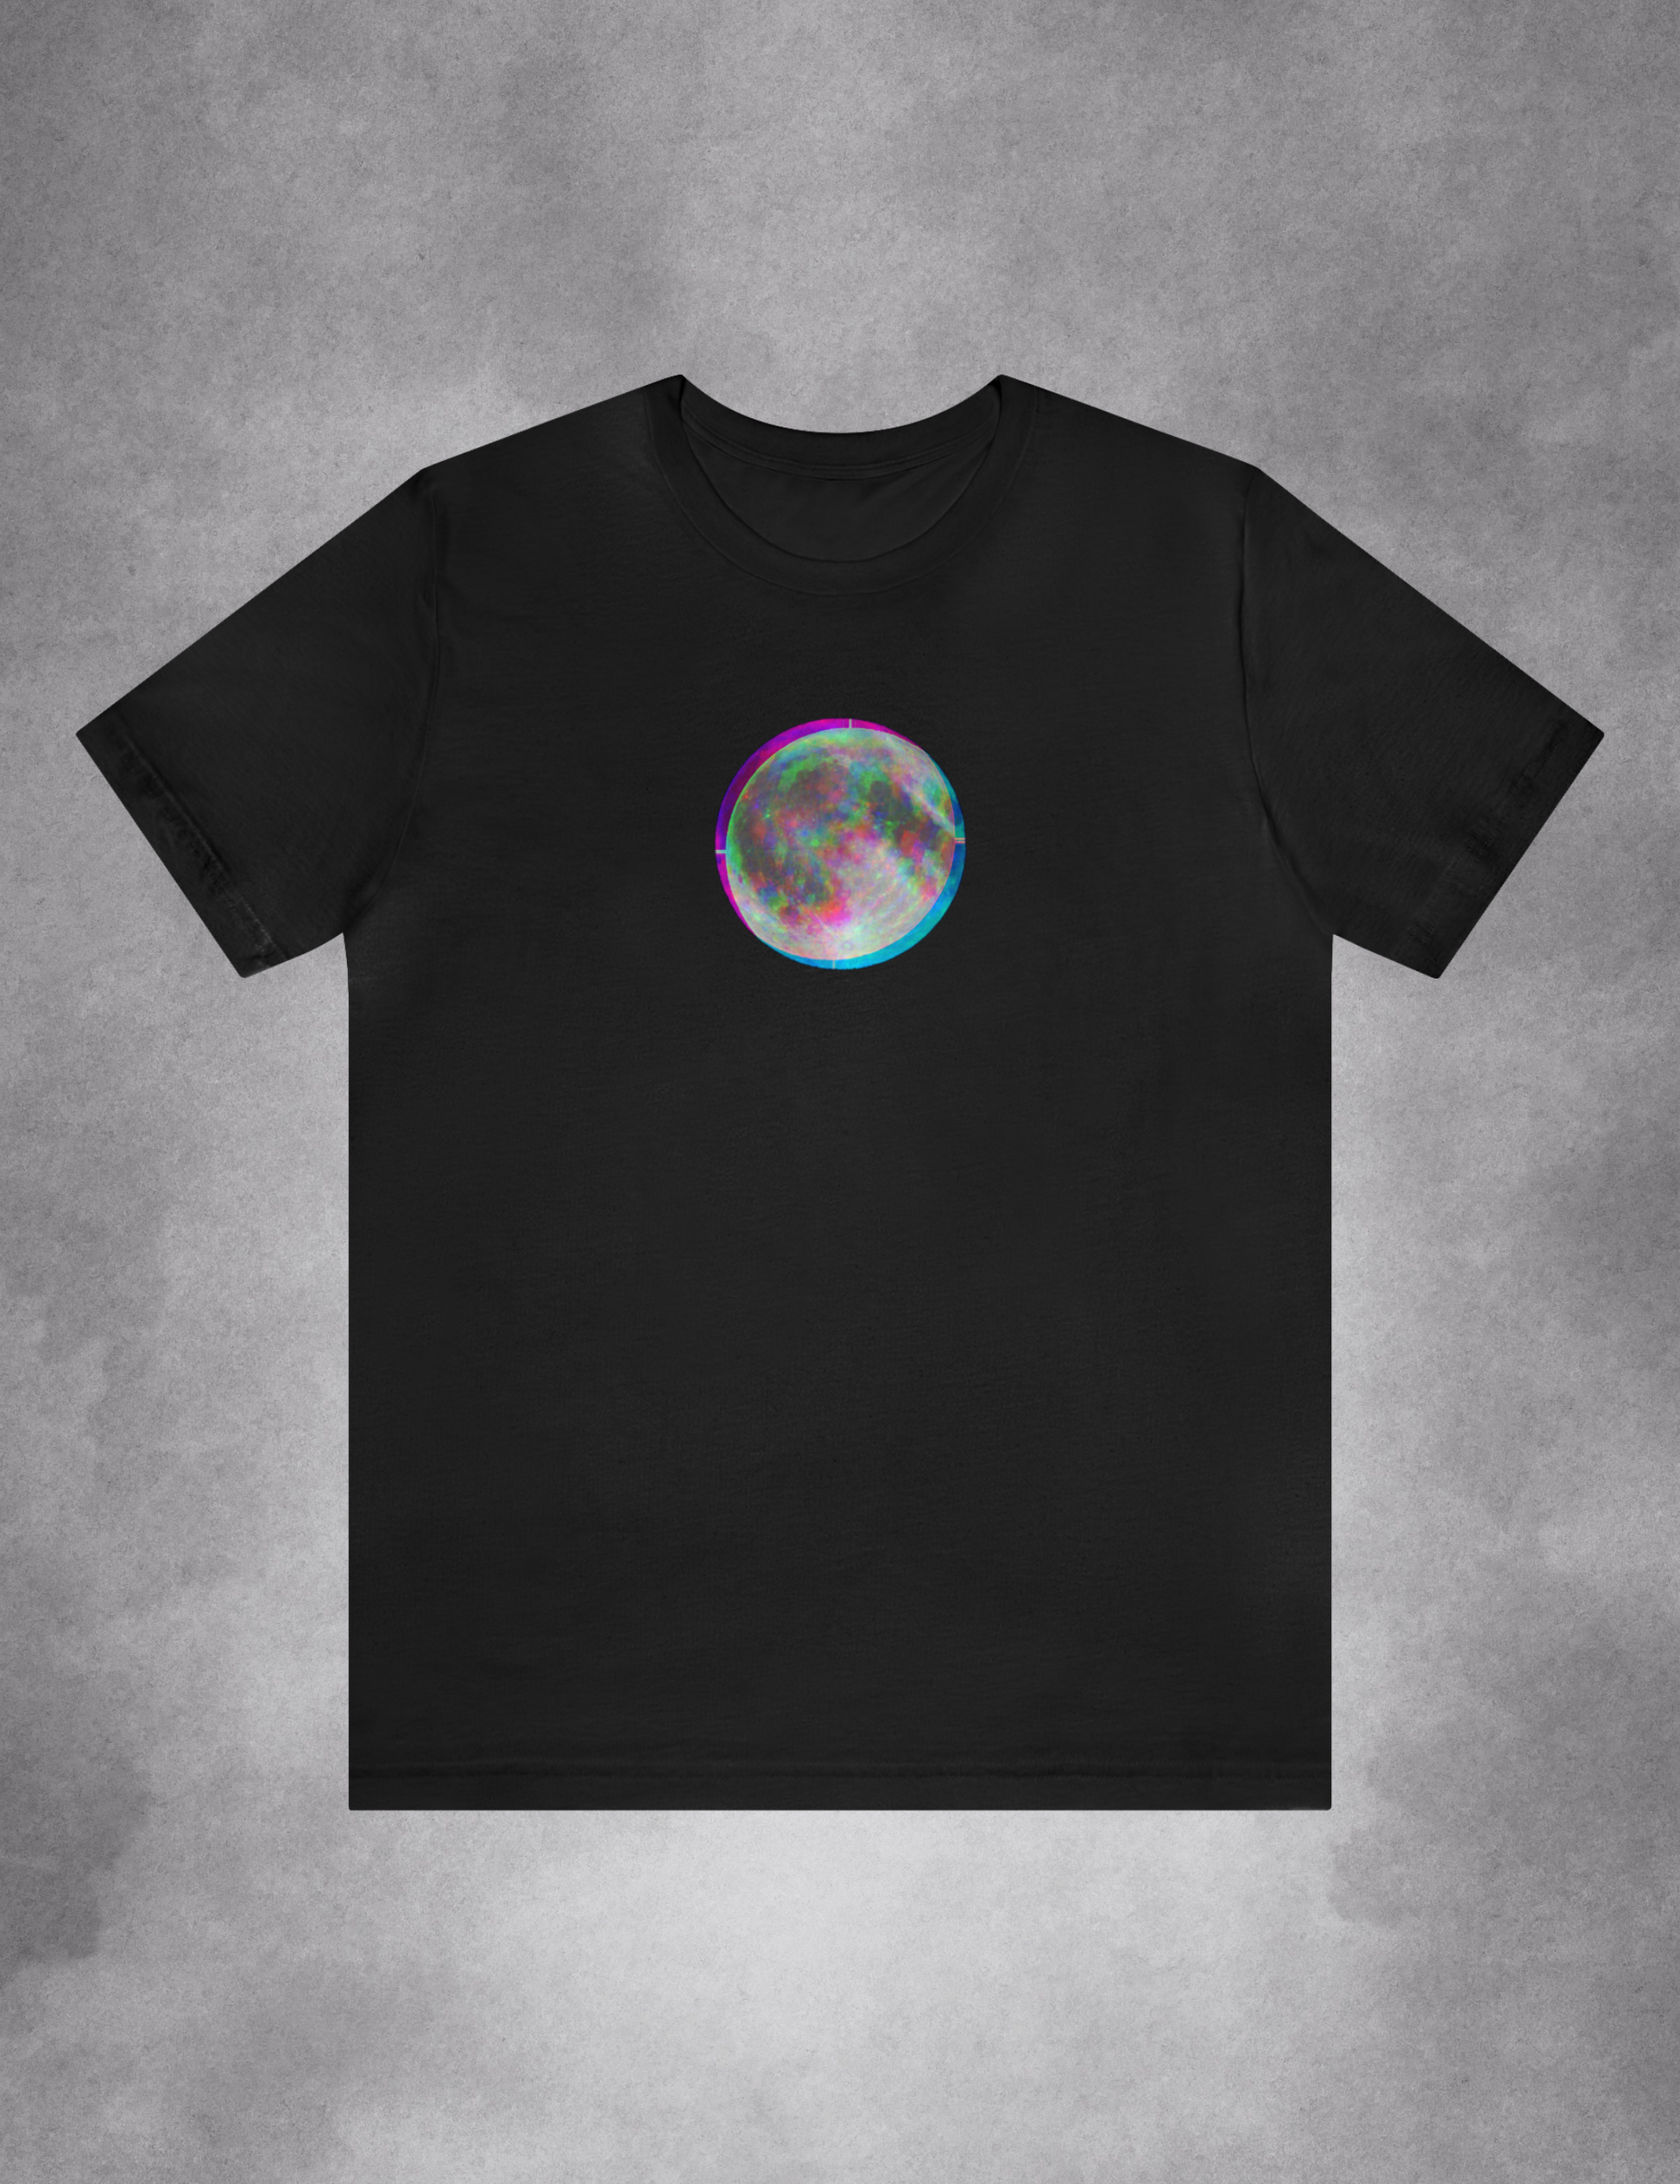 Witchy Aesthetic Plus Size Glitch Moon Phase Shirt